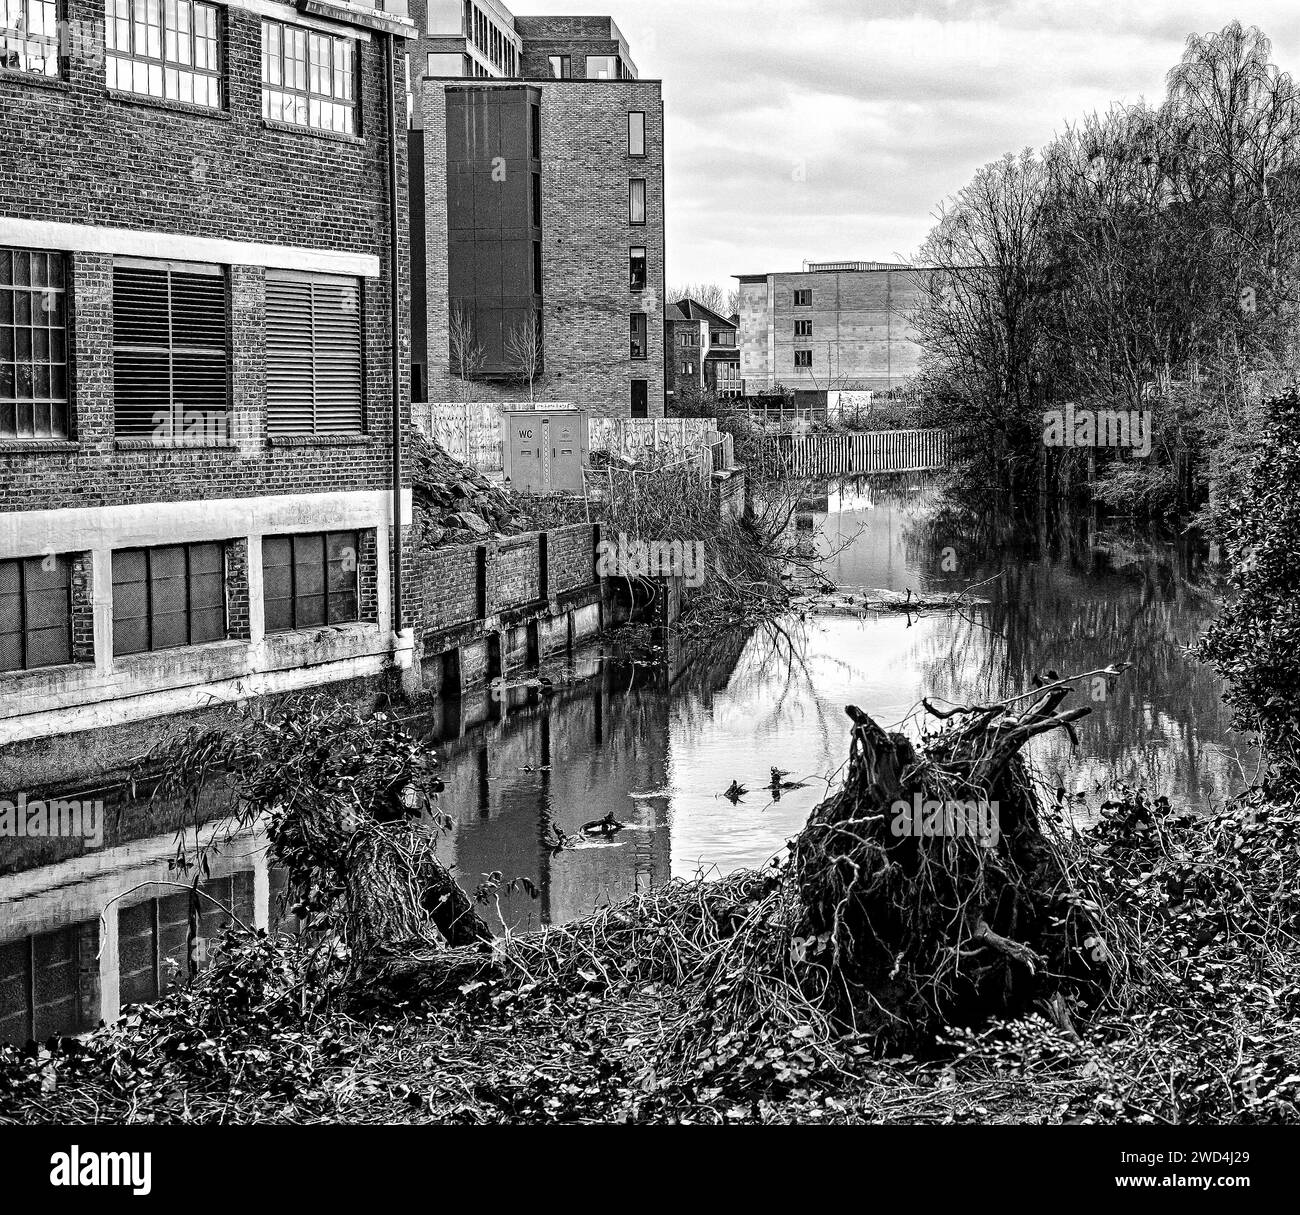 An uprooted tree on a river bank. The river contains debris and runs by a partially developed urban area. Stock Photo